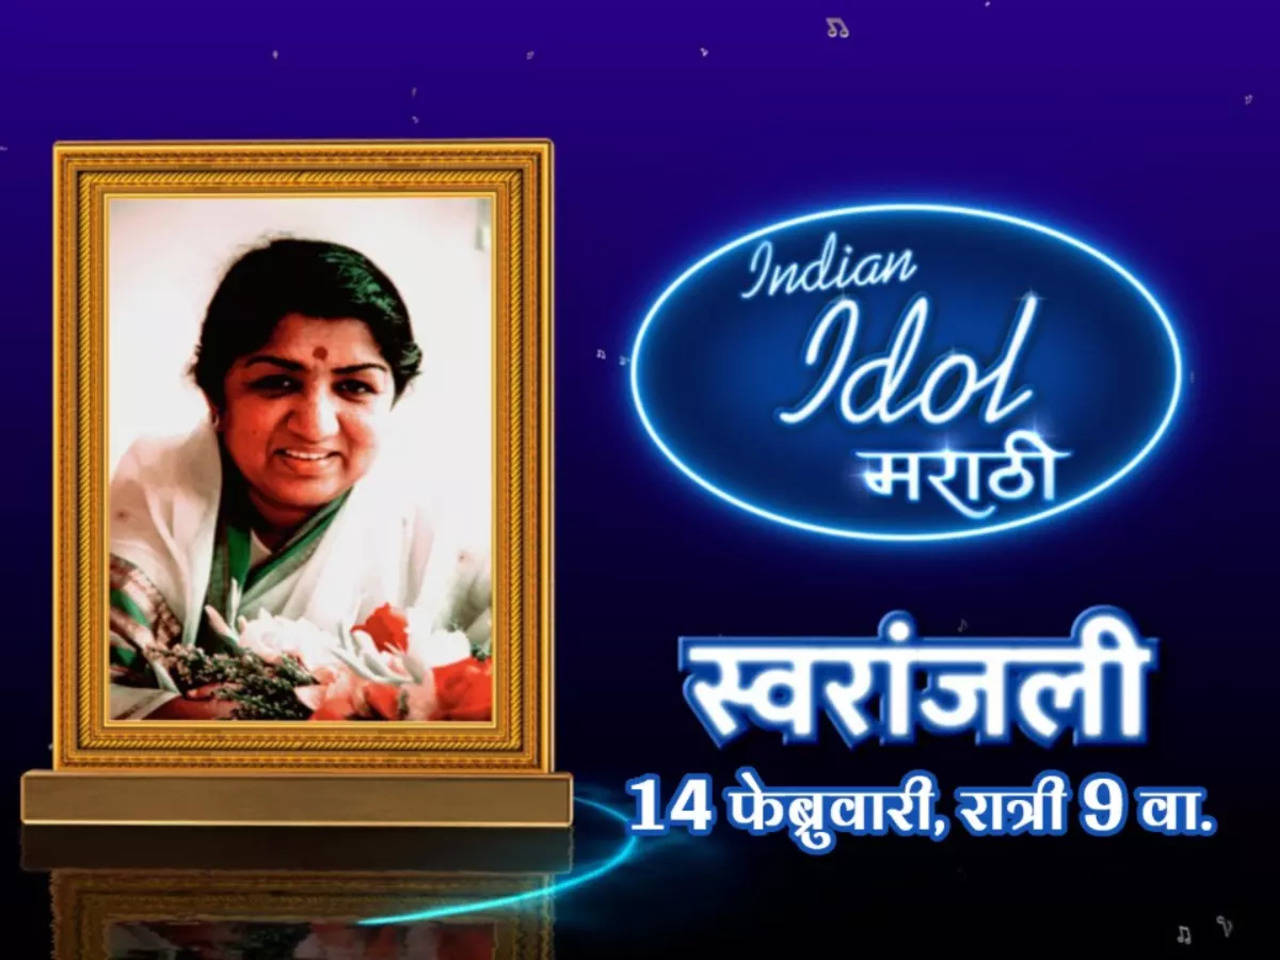 Indian Idol Marathi to pay a tribute to legendary singer Lata ...